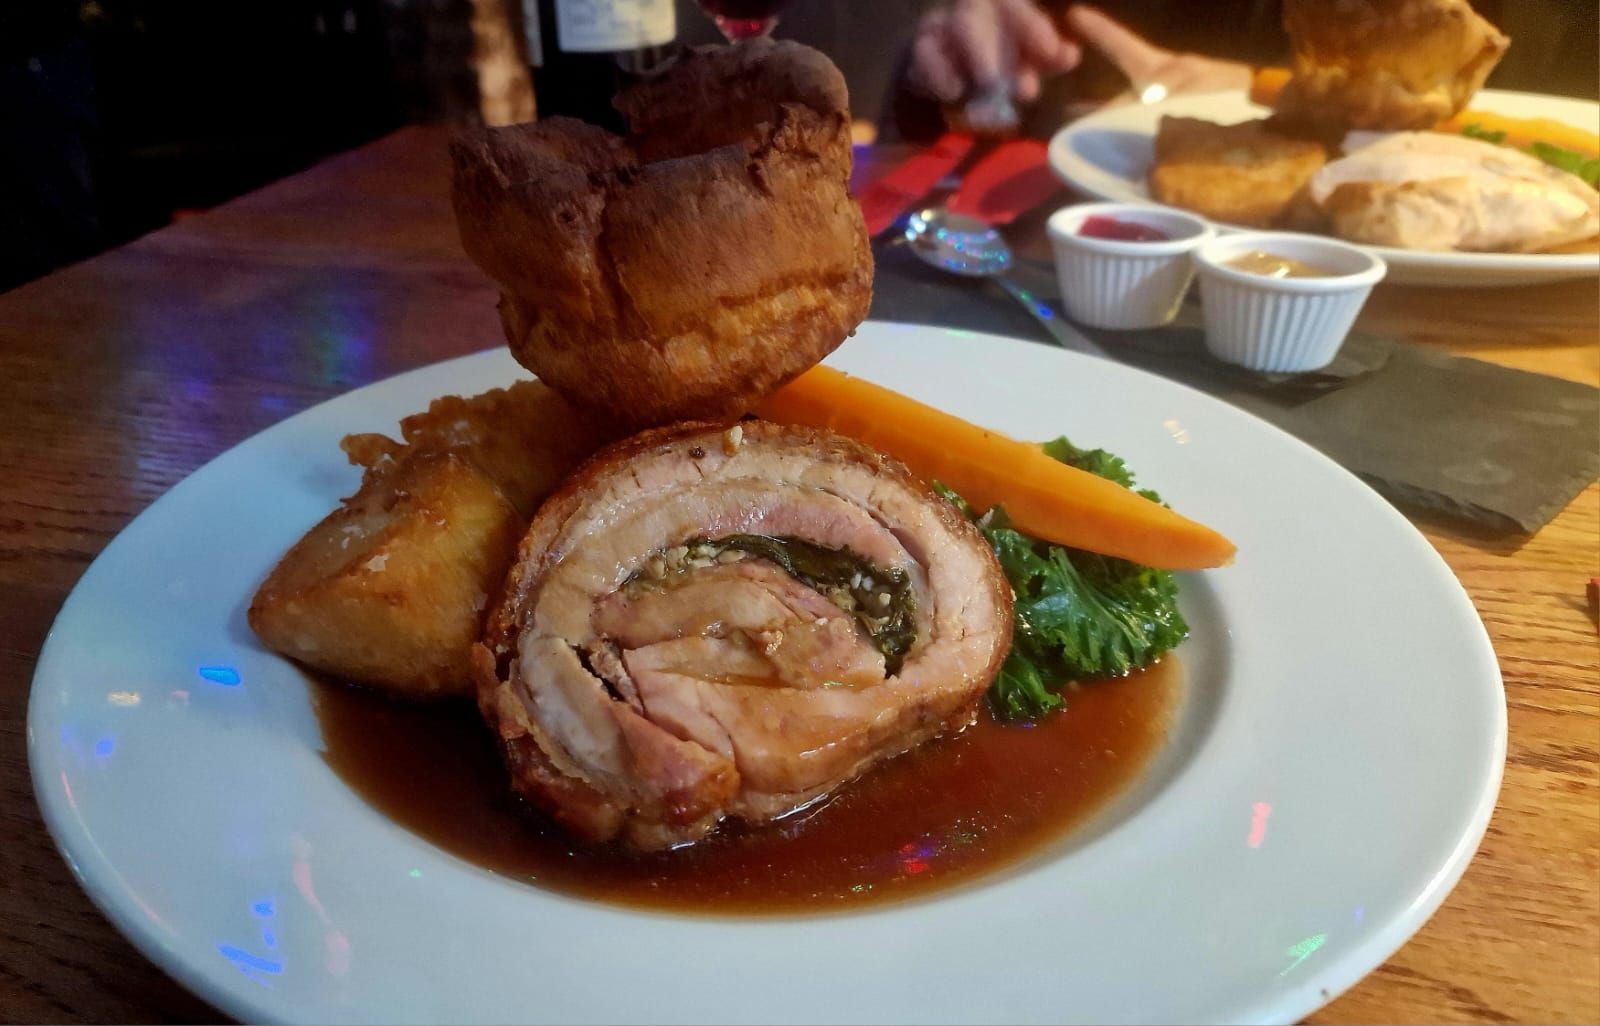 slow cooked porchetta served on the white plate with the Yorkshire pudding. Sunday roast delight at the New Inn 